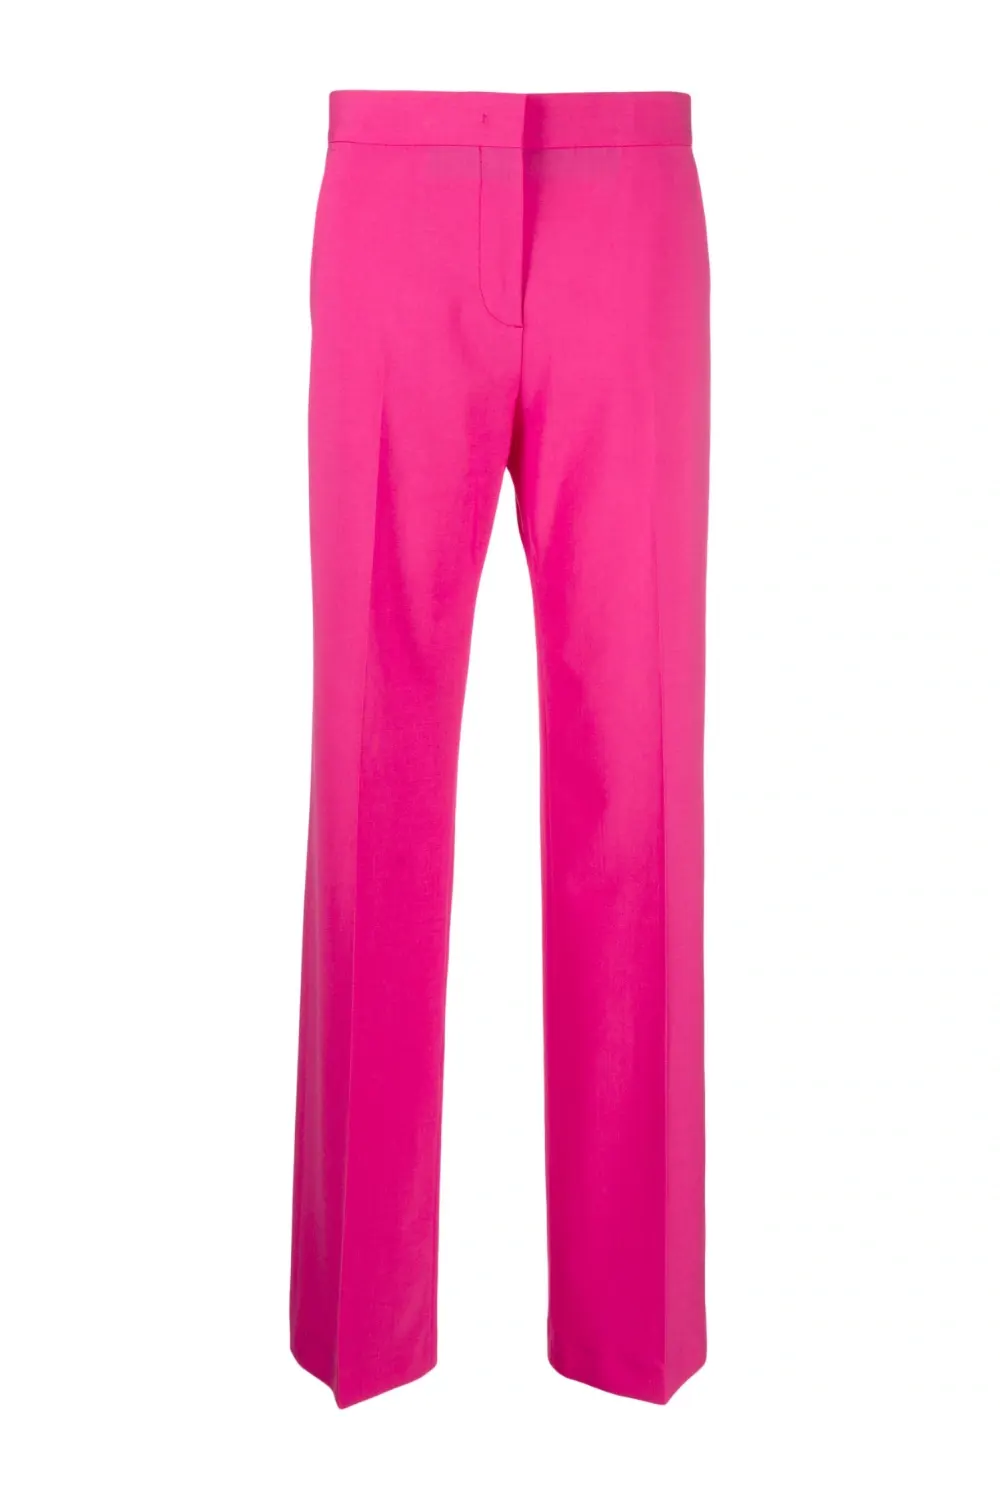 Wool wide-leg high-waisted trousers, pink